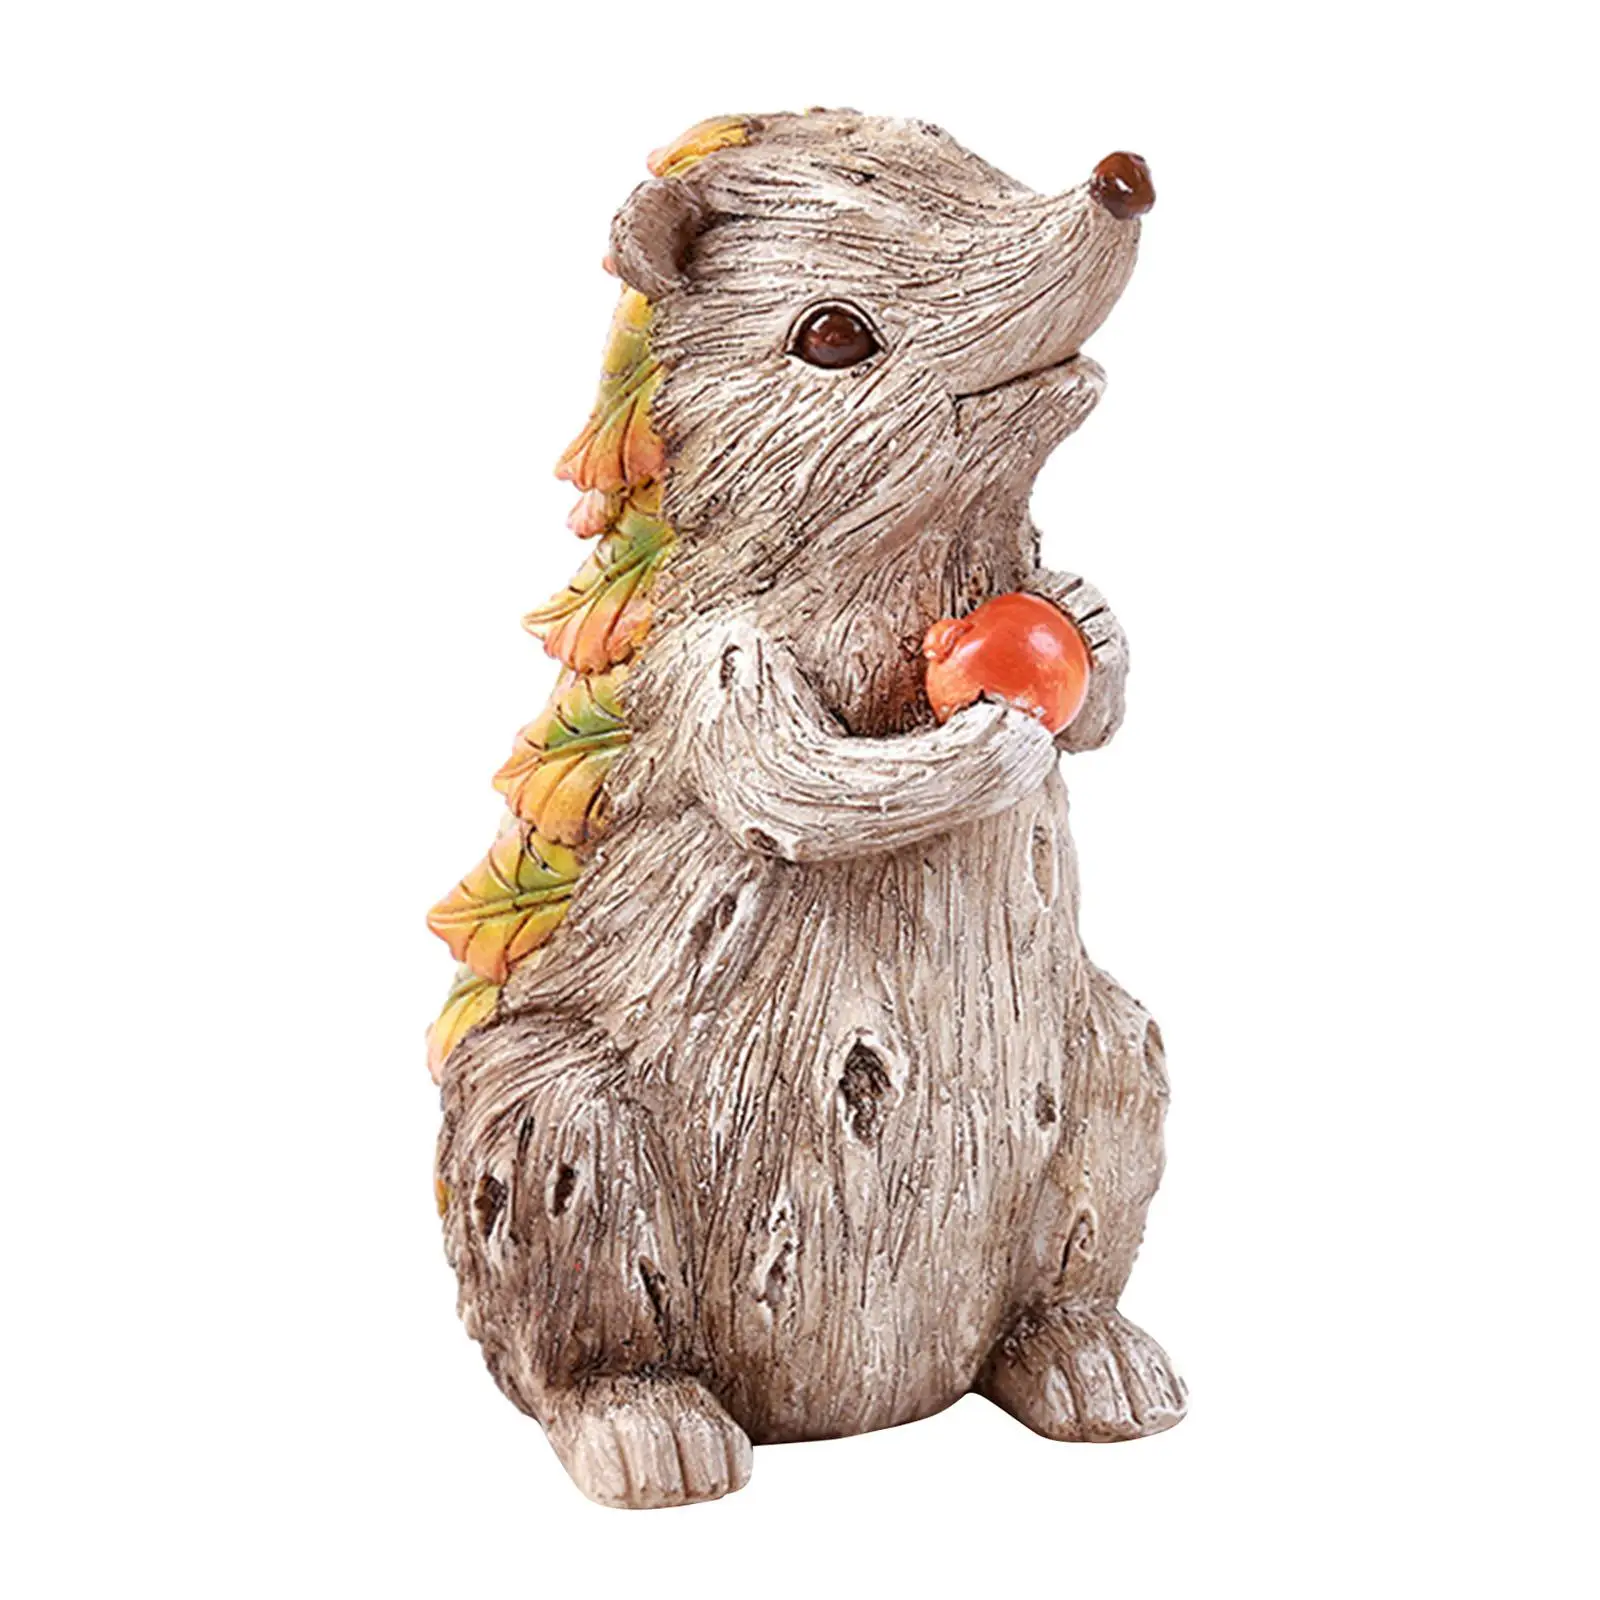 

Lovely Small Hedgehog Ornament Garden Figurine Photo Prop Statue Sculpture Landscape Art Crafts for Patio Gift Table Decor Pond